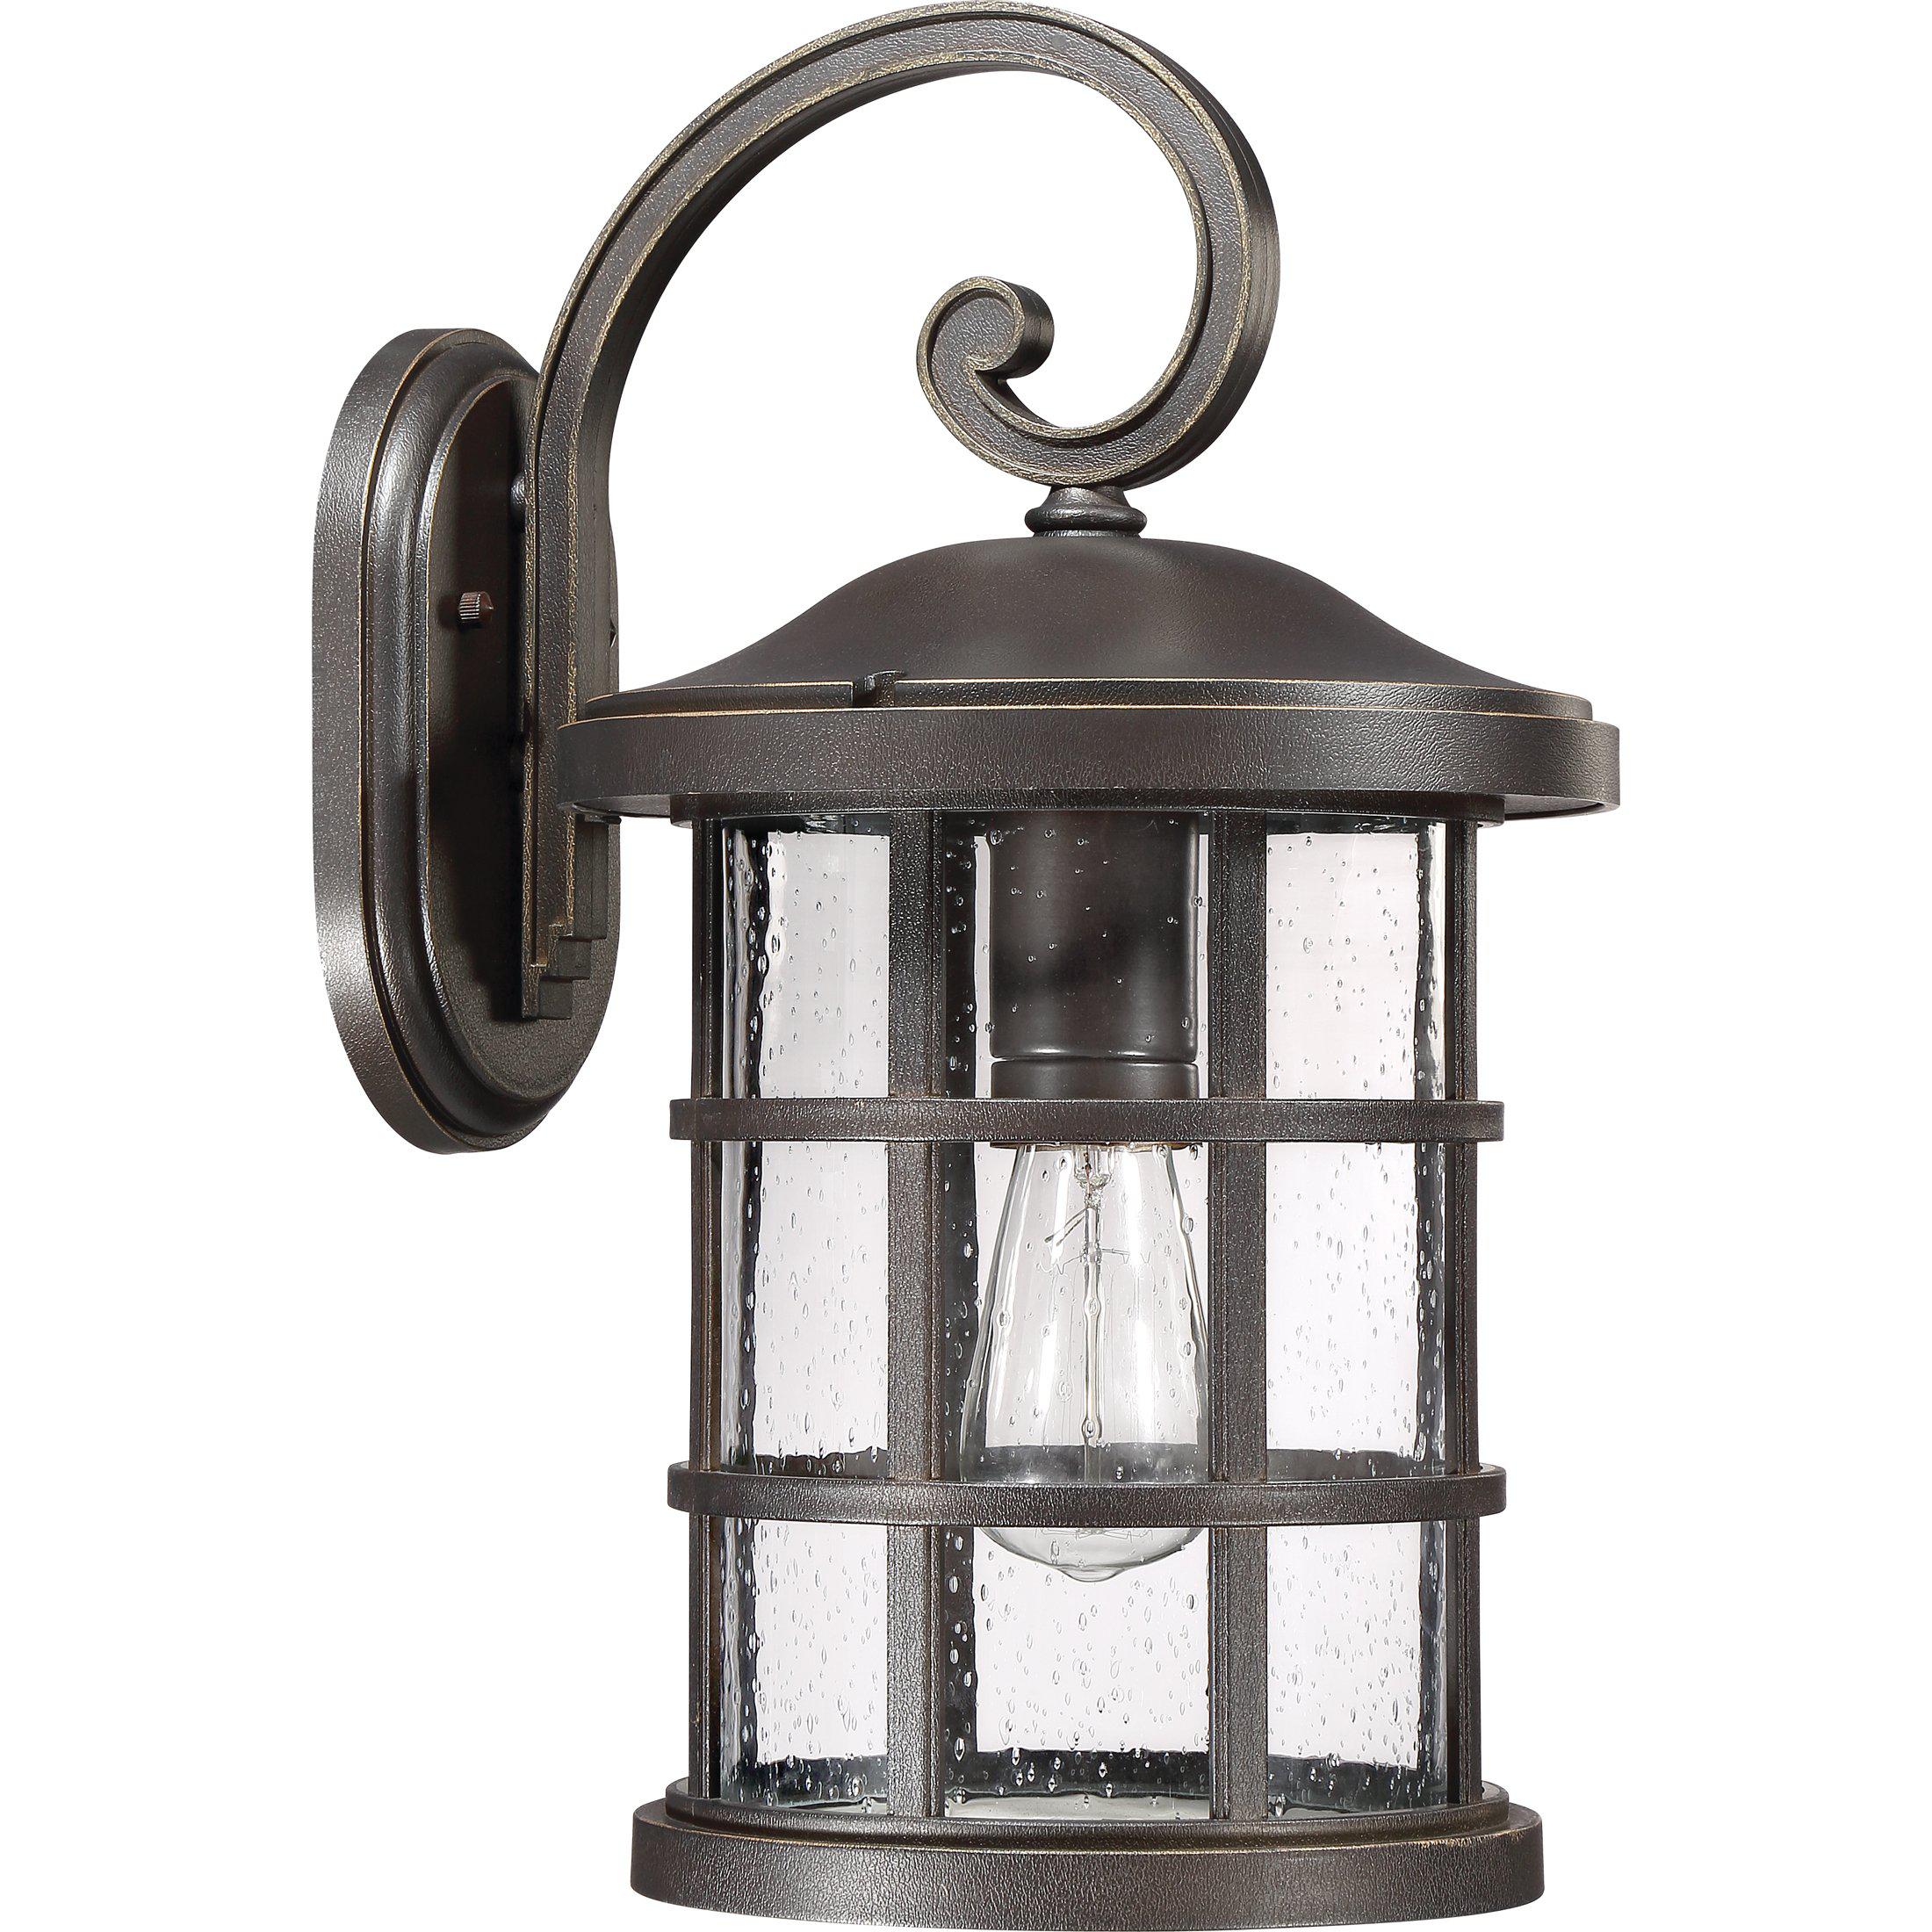 Quoizel  Crusade Outdoor Lantern, Large Outdoor l Wall Quoizel   